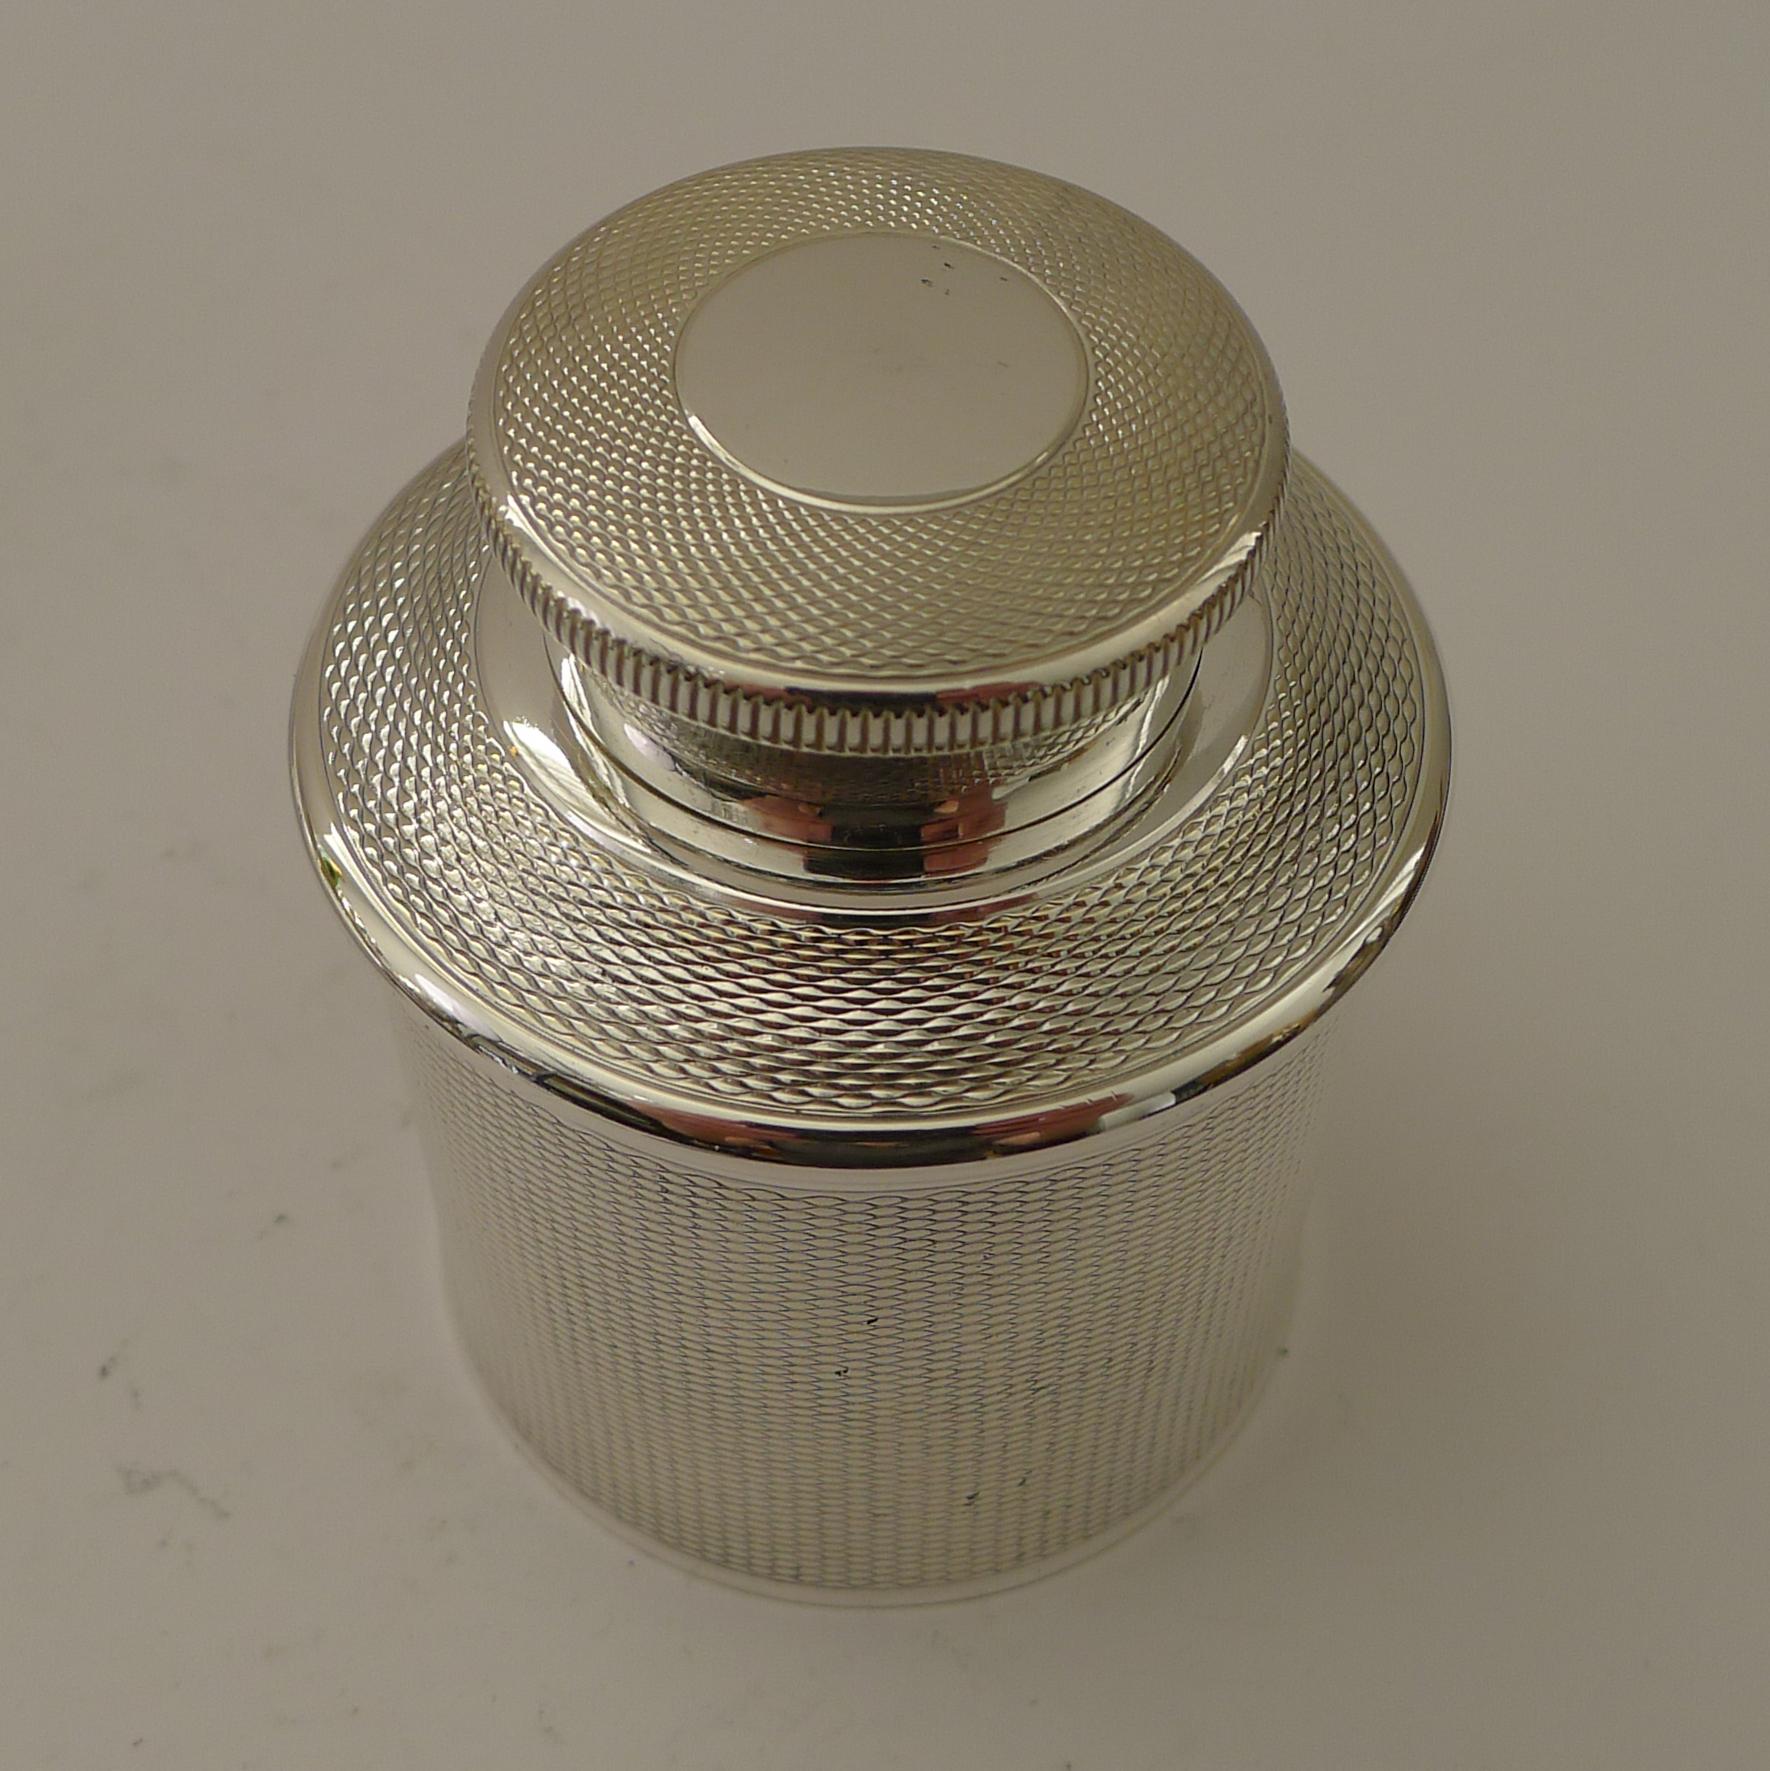 A rarely found French silver plated tea caddy or cannister dating to c.1940 / 1950.

Beautifully decorated with engine turning and fully marked on the underside by Maison, Christofle or Paris.

Excellent condition measuring 2 3/8